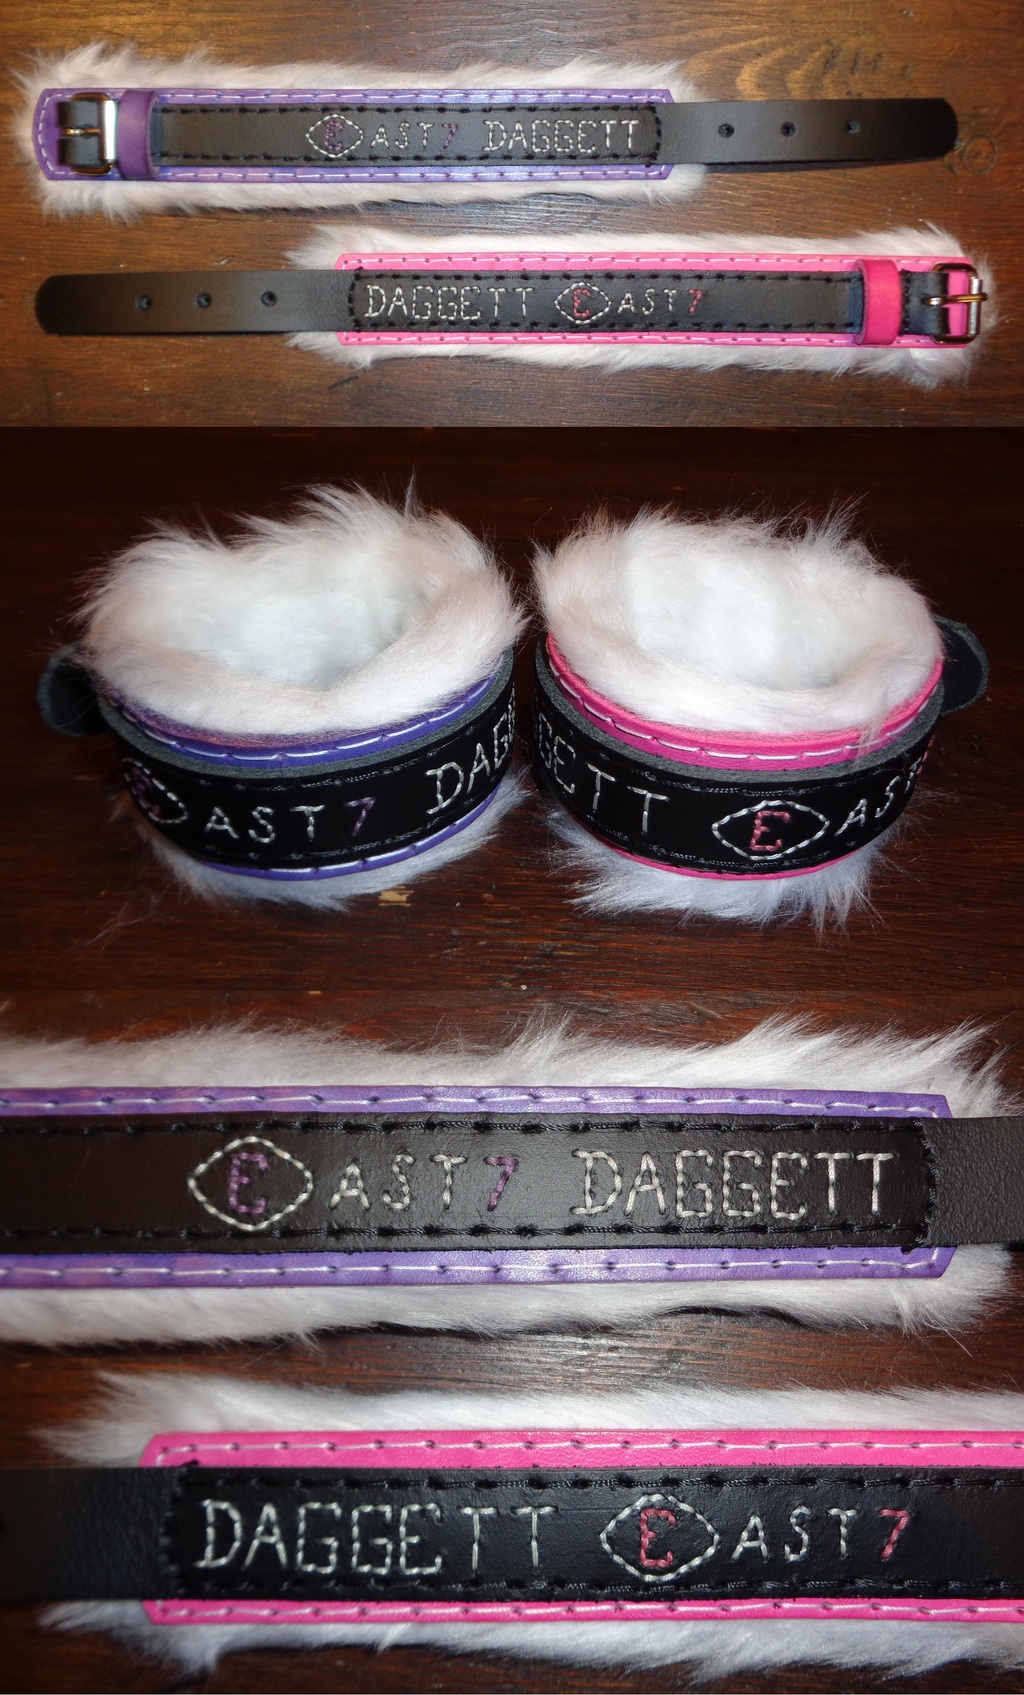 EAST 7 - Leather Bracelets (5 and 6/7) for Daggett